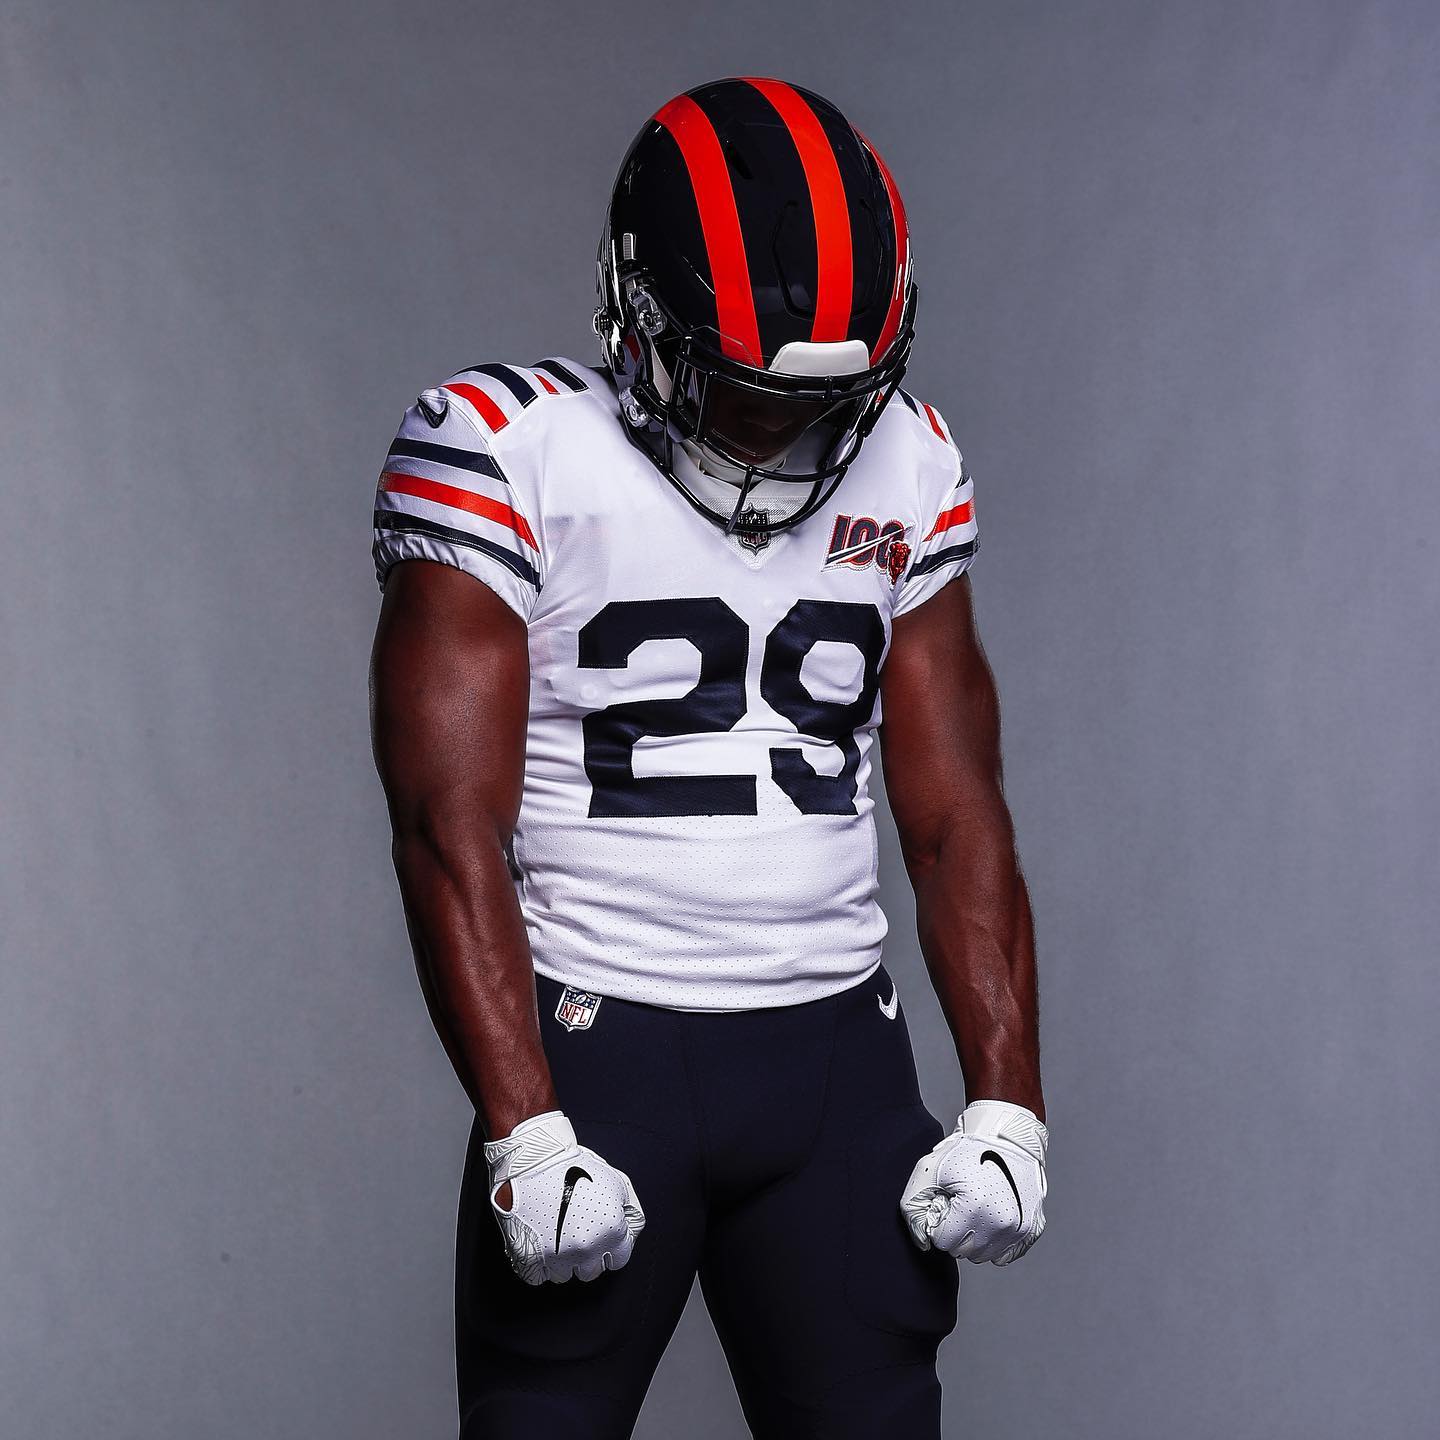 Bears unveil new throwback uni: White jersey, striped socks and no